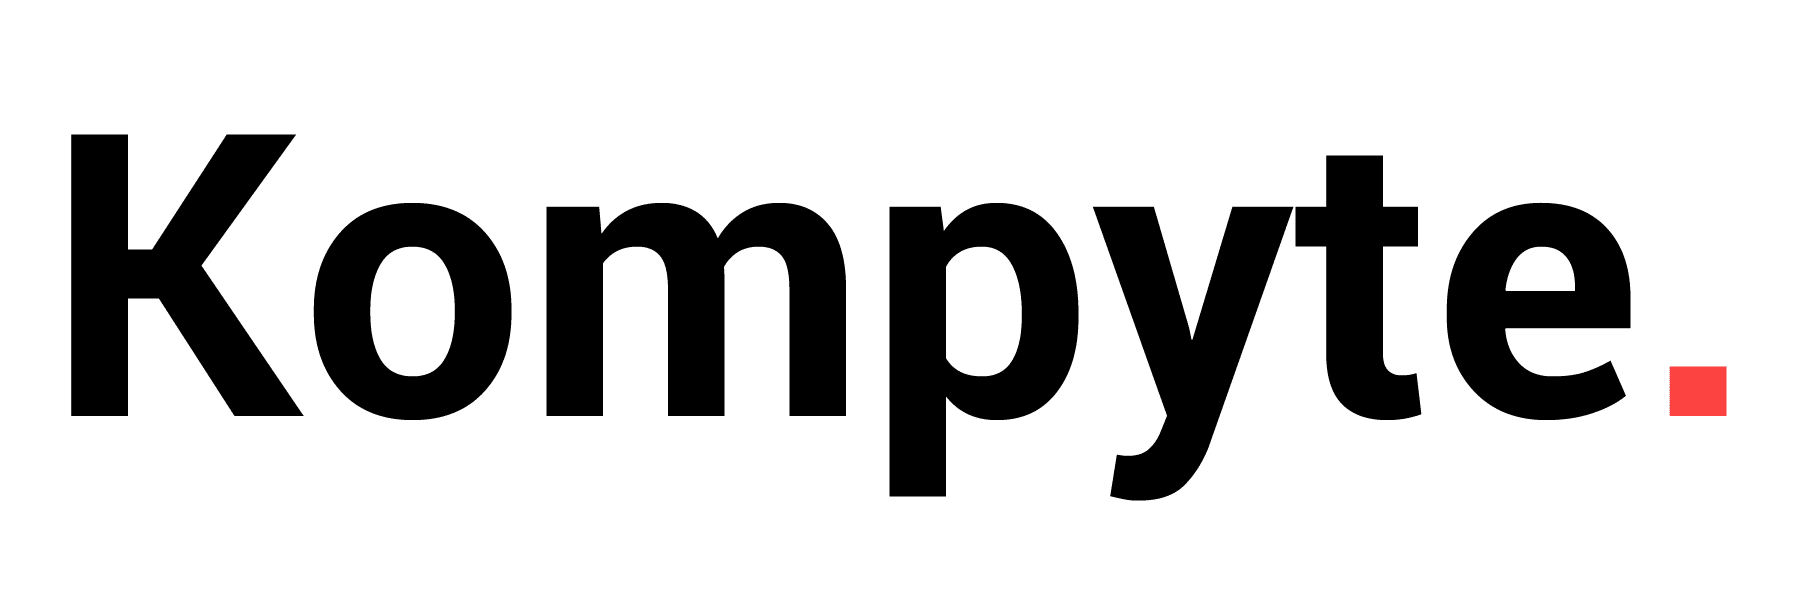 kompyte review – pricing, features, benefits